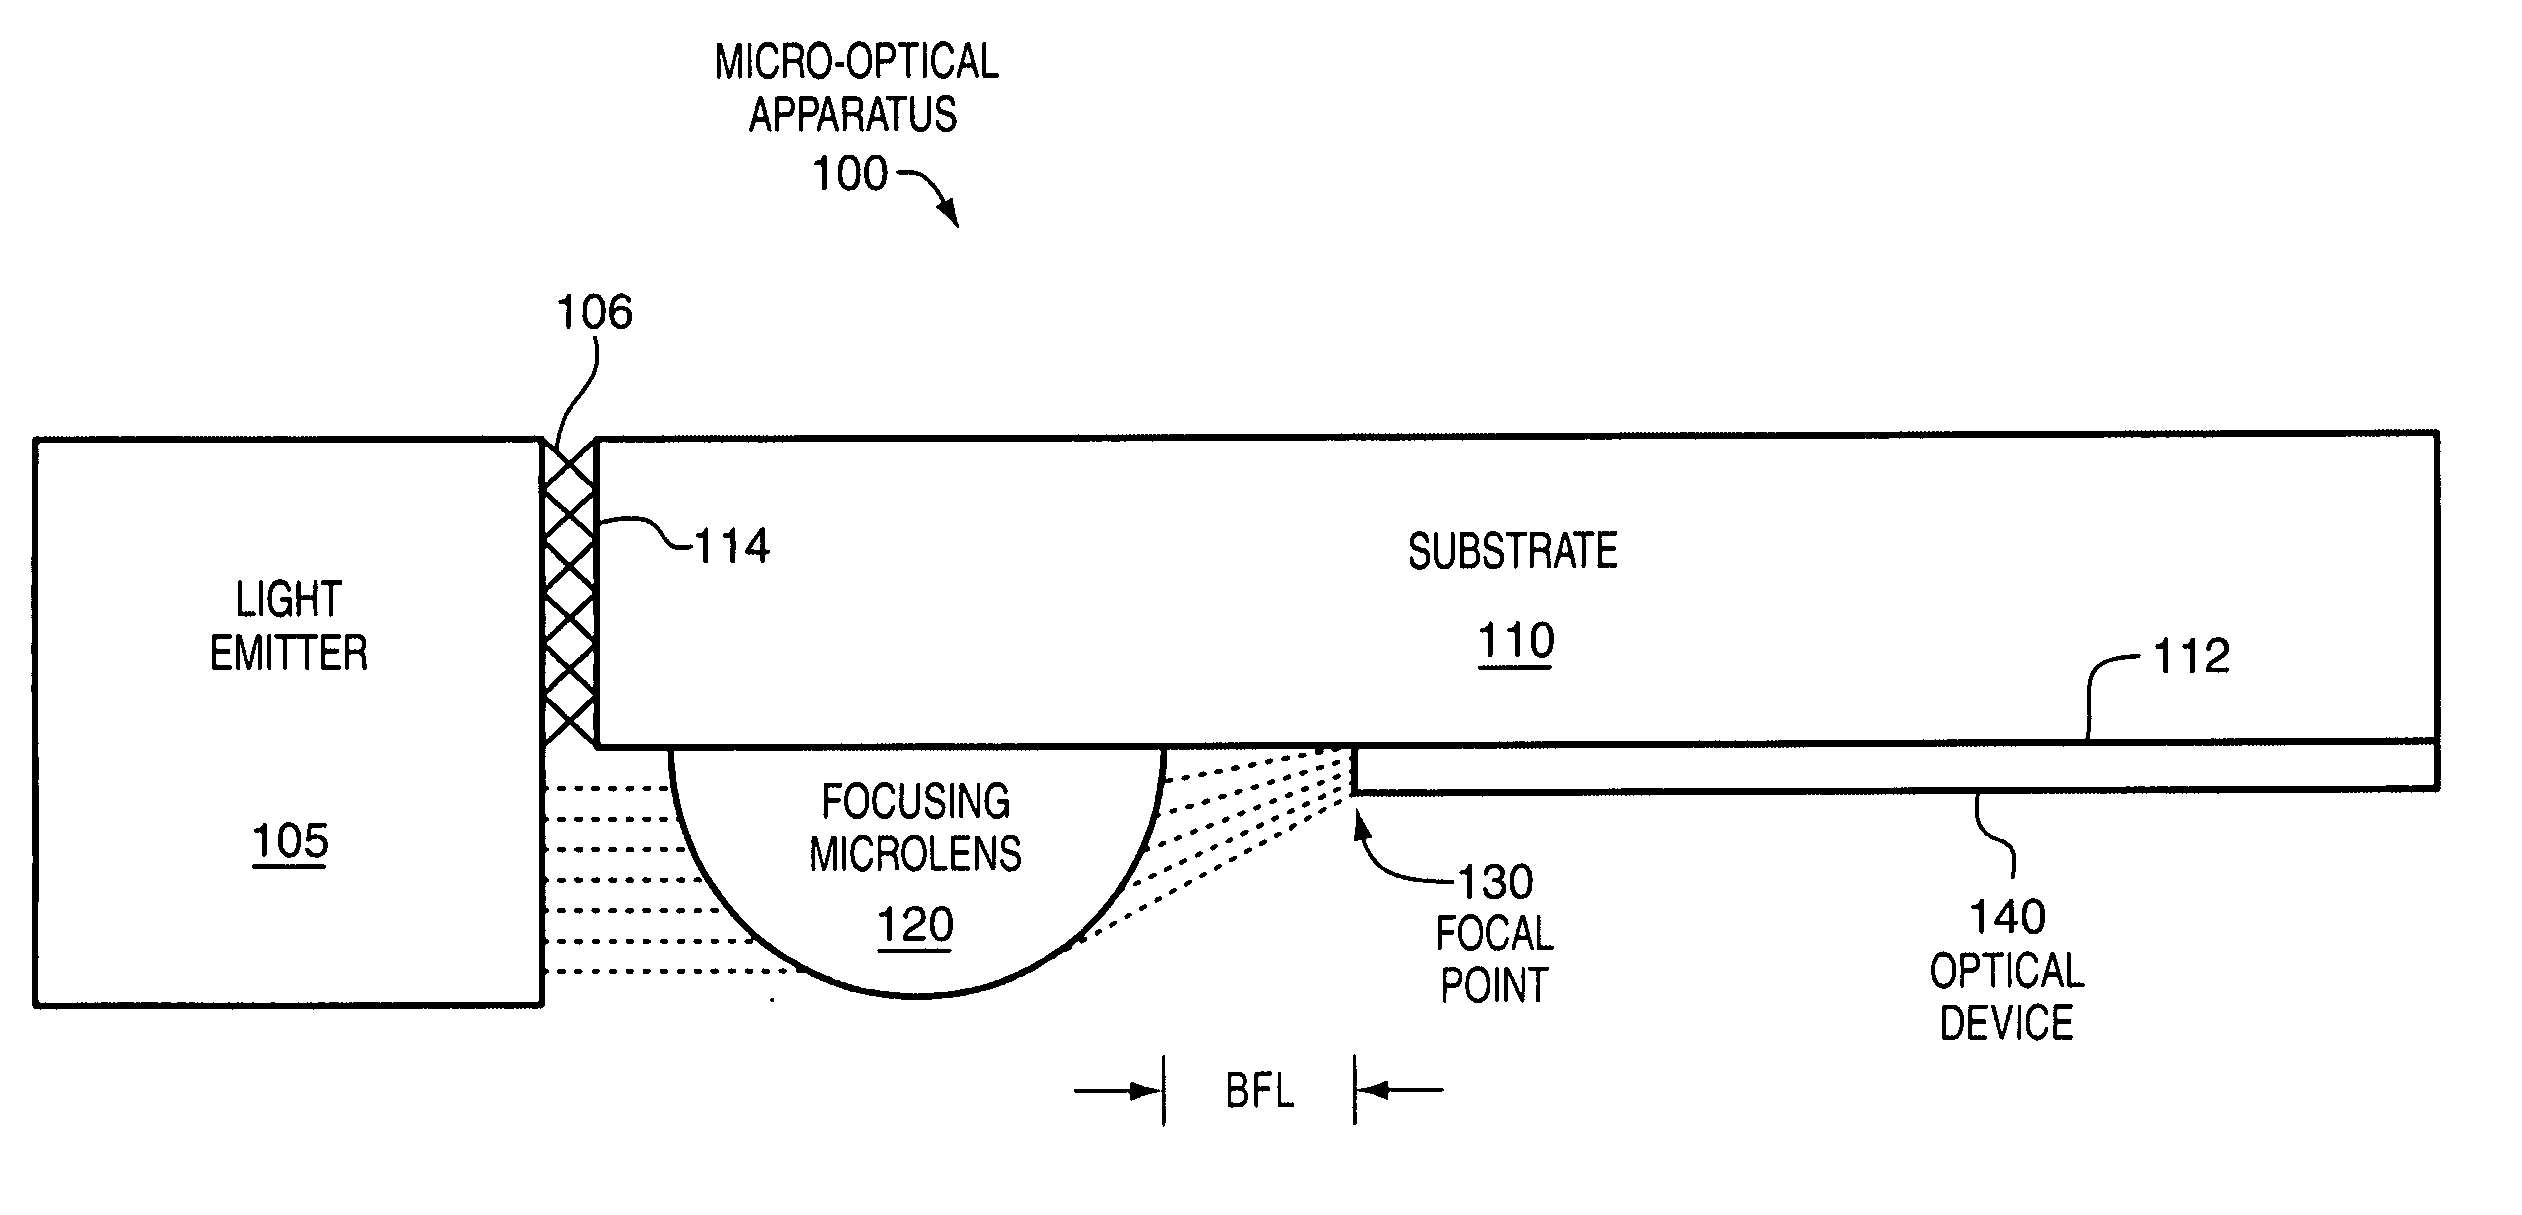 On-substrate microlens to couple an off-substrate light emitter and/or receiver with an on-substrate optical device